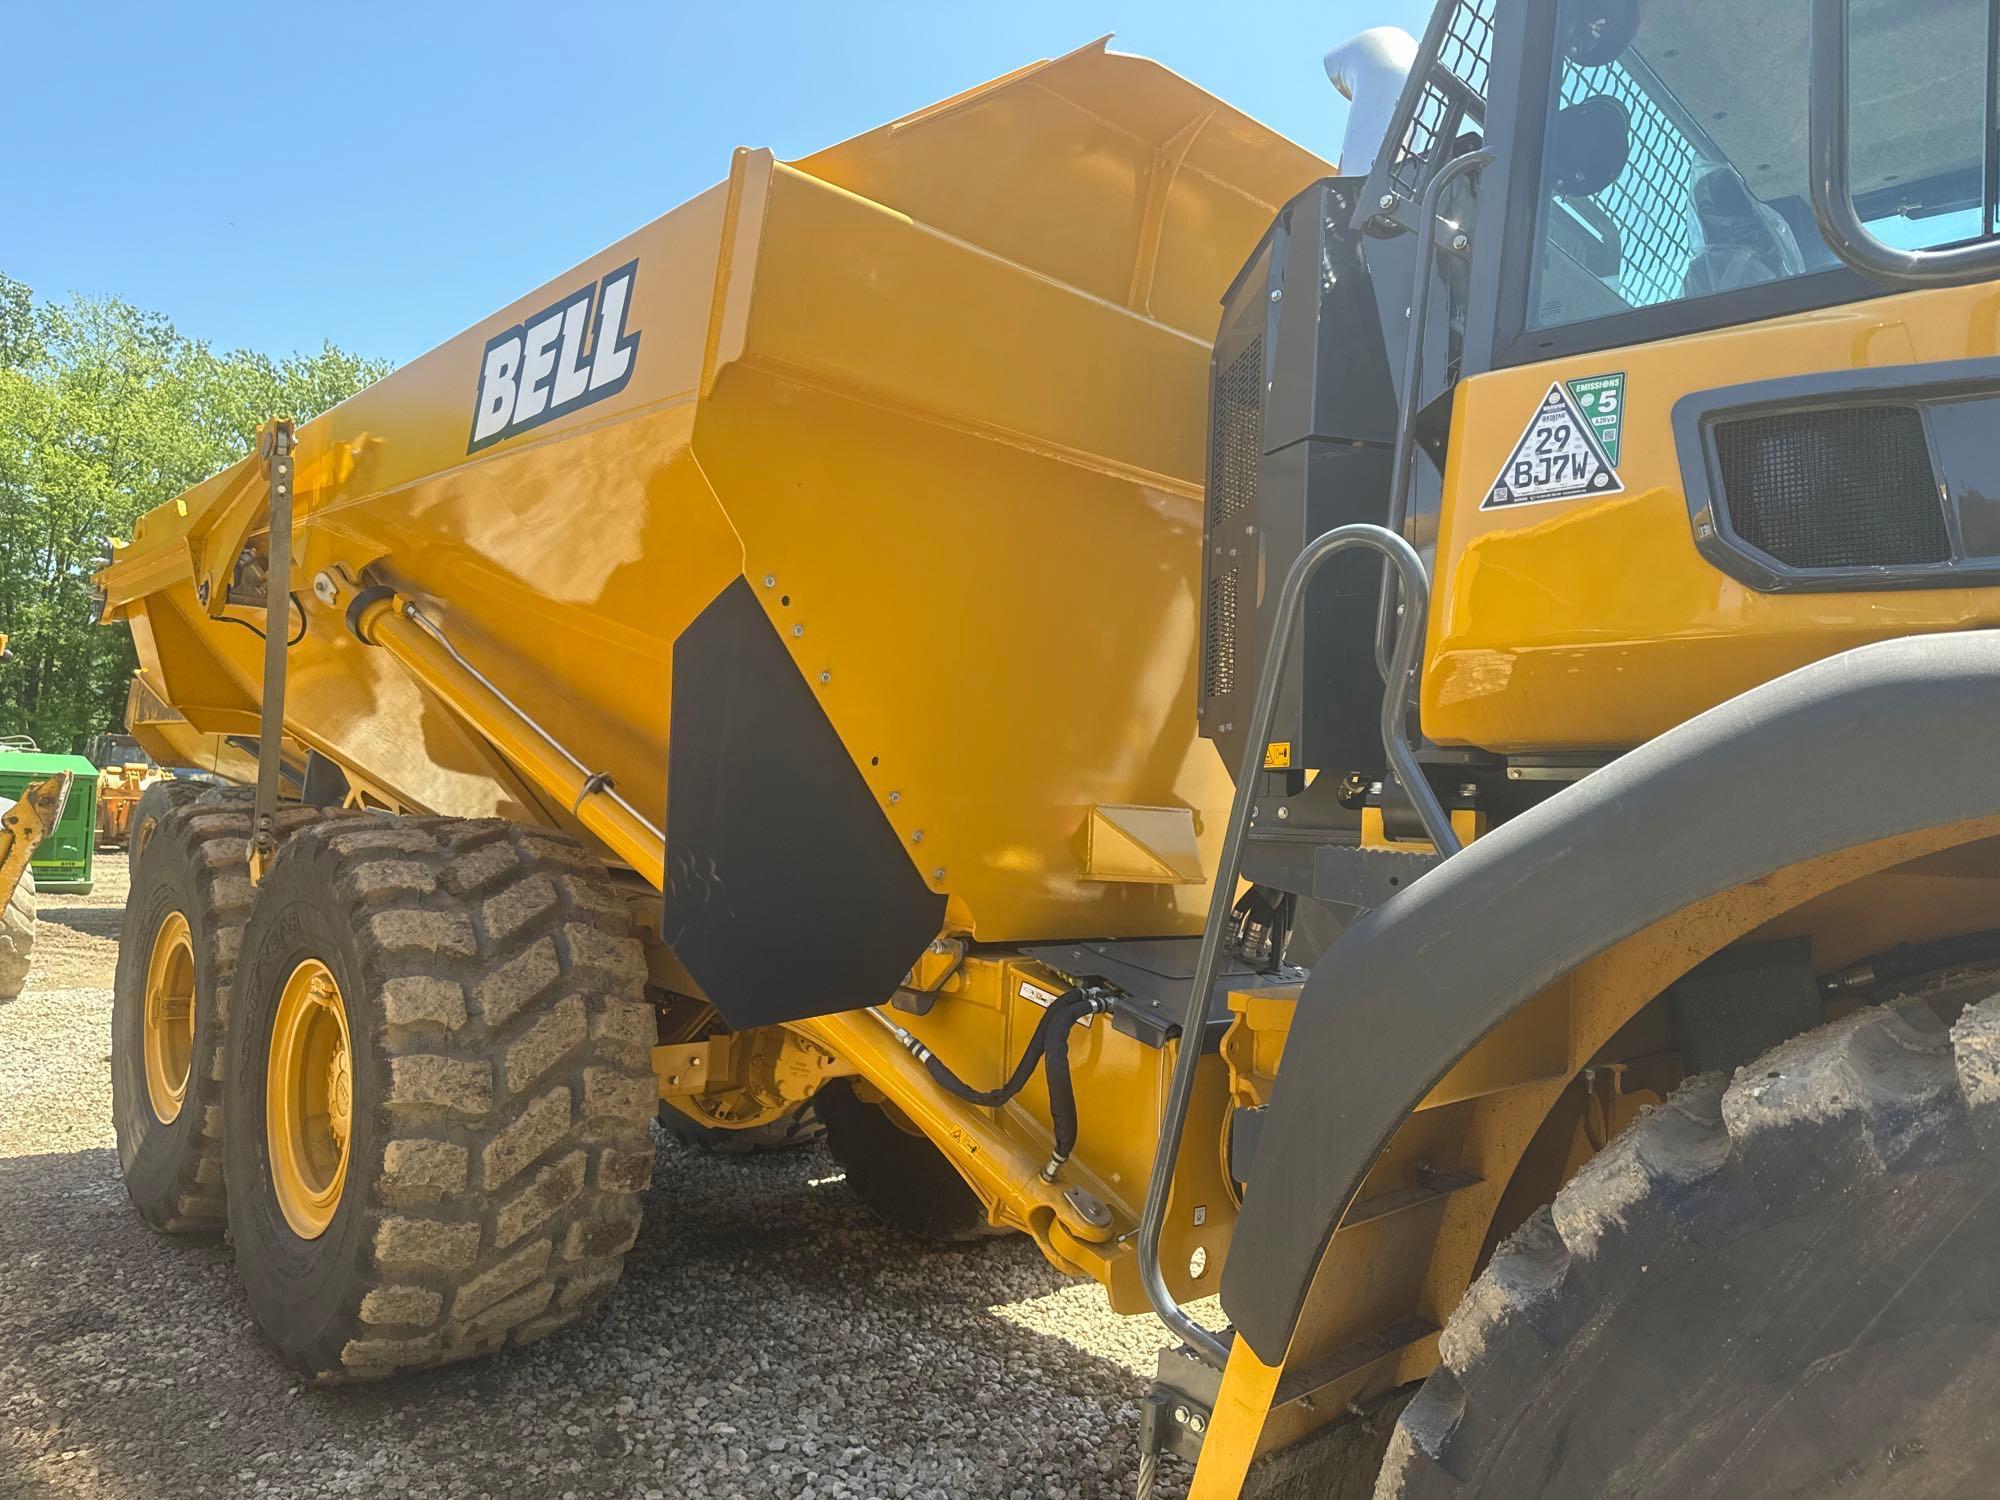 NEW BELL B30E ARTICULATED HAUL TRUCK SN 3411015 powered by diesel engine, equipped with Cab, air,